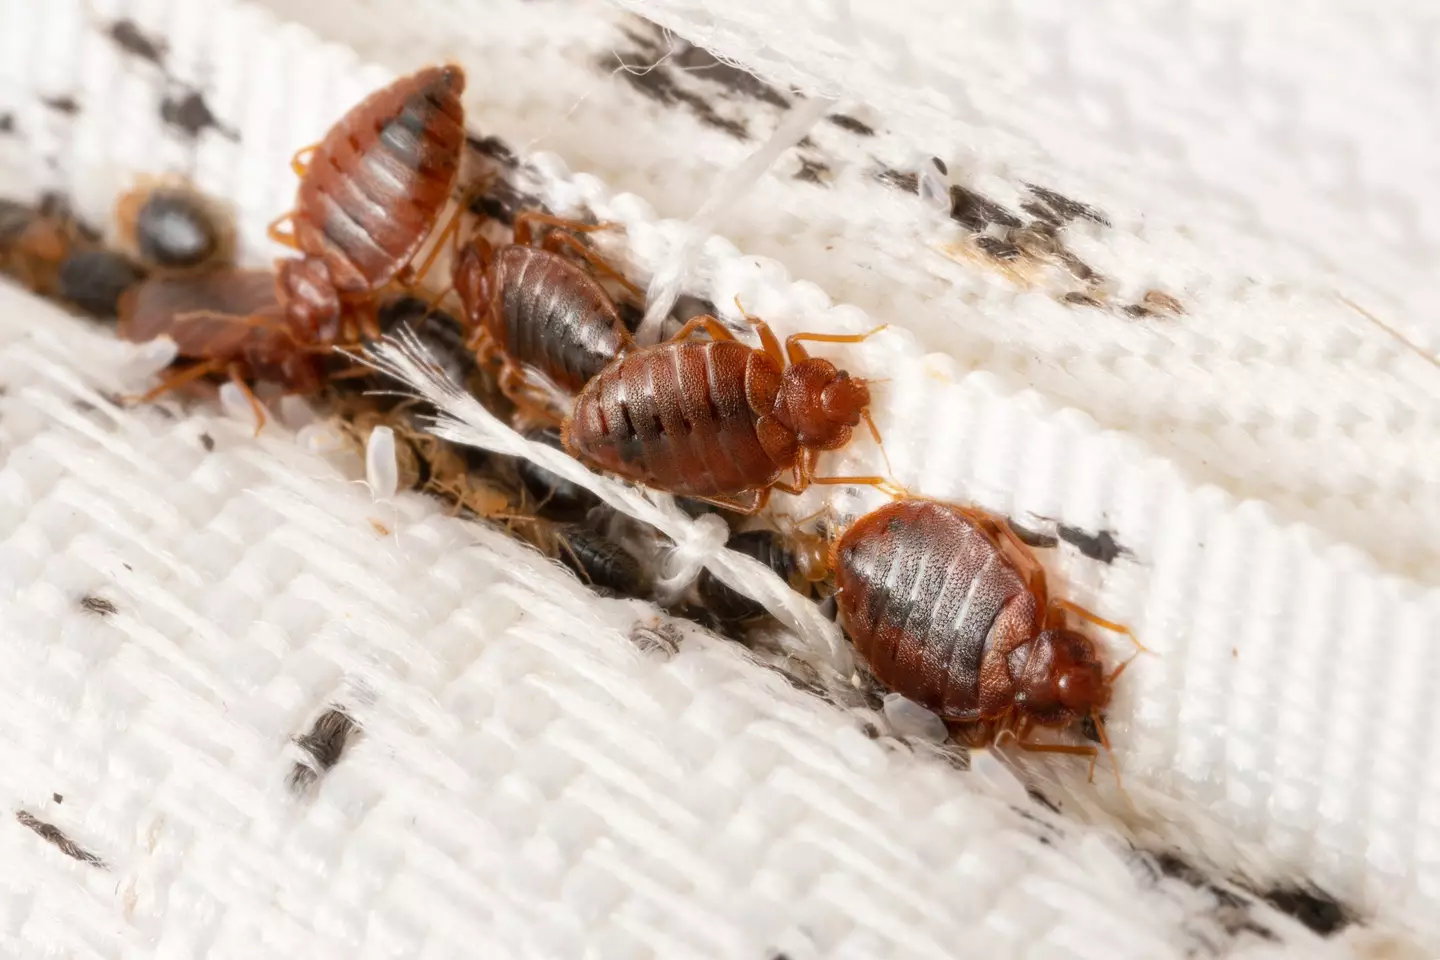 Bedbugs breed very quickly once they find somewhere they like.